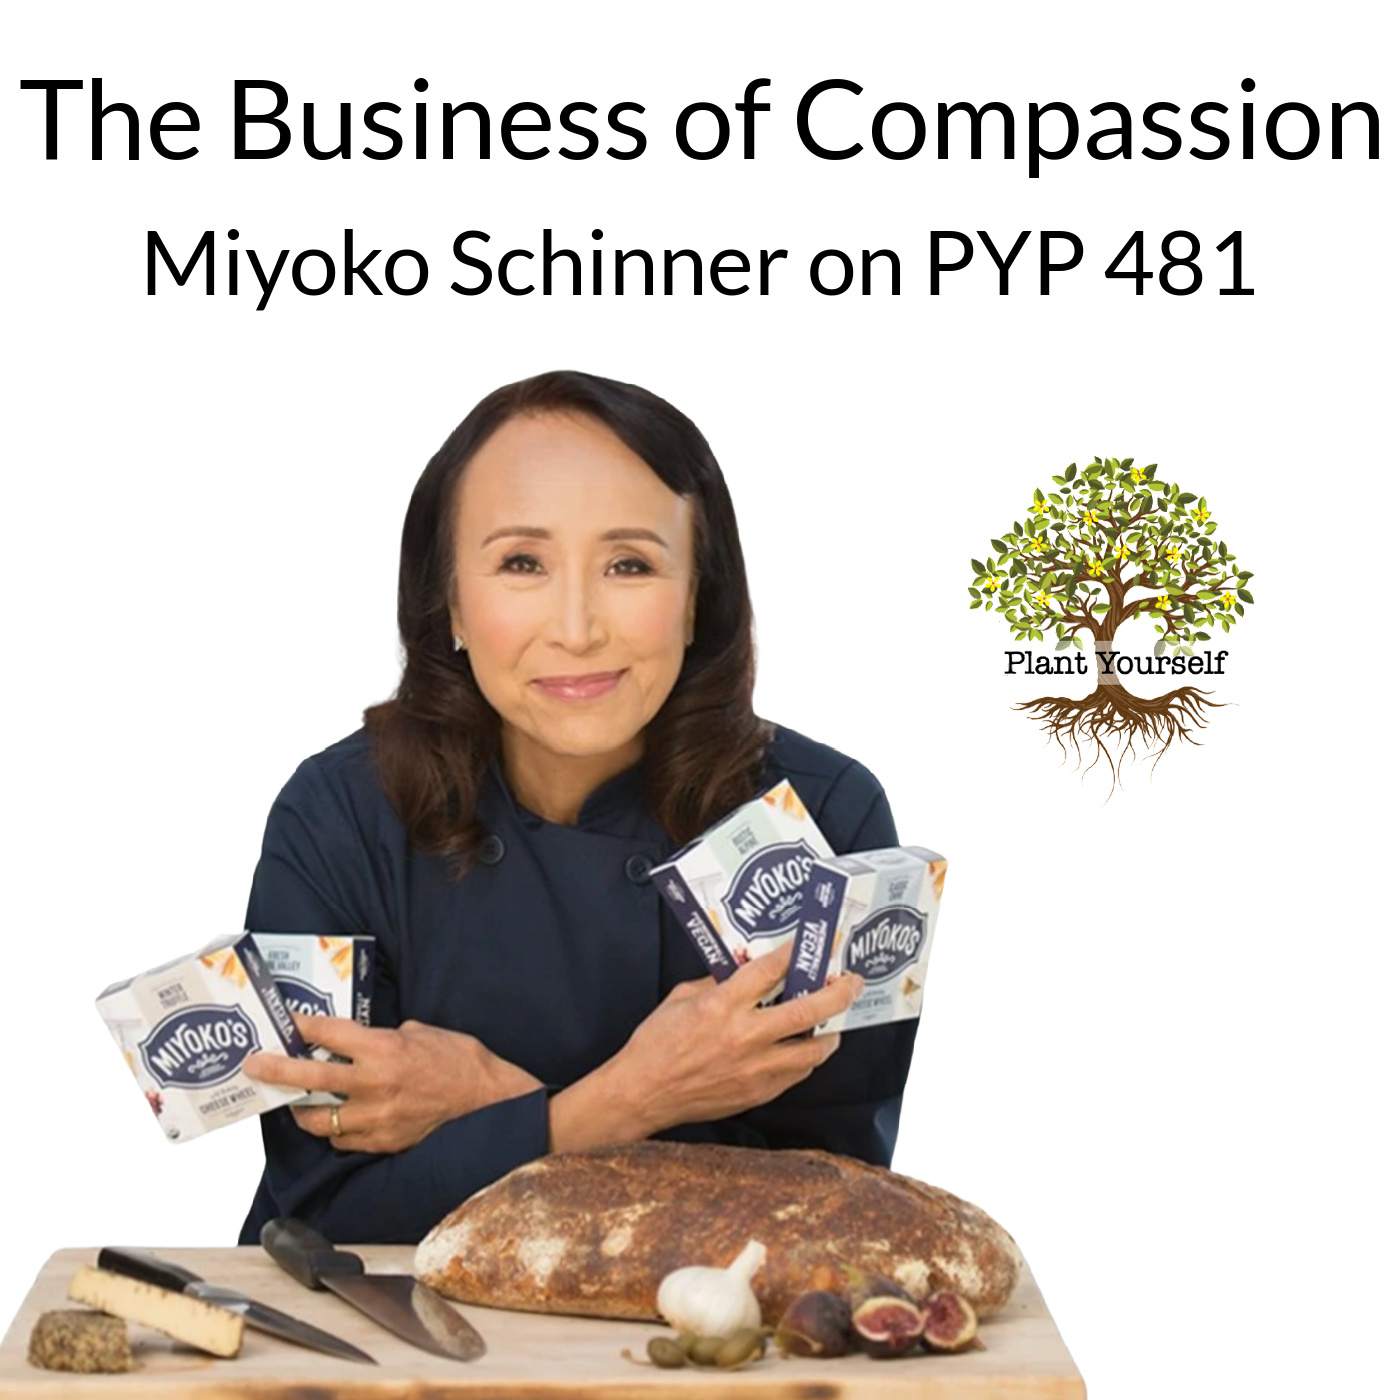 The Business of Compassion: Miyoko Schinner on PYP 481